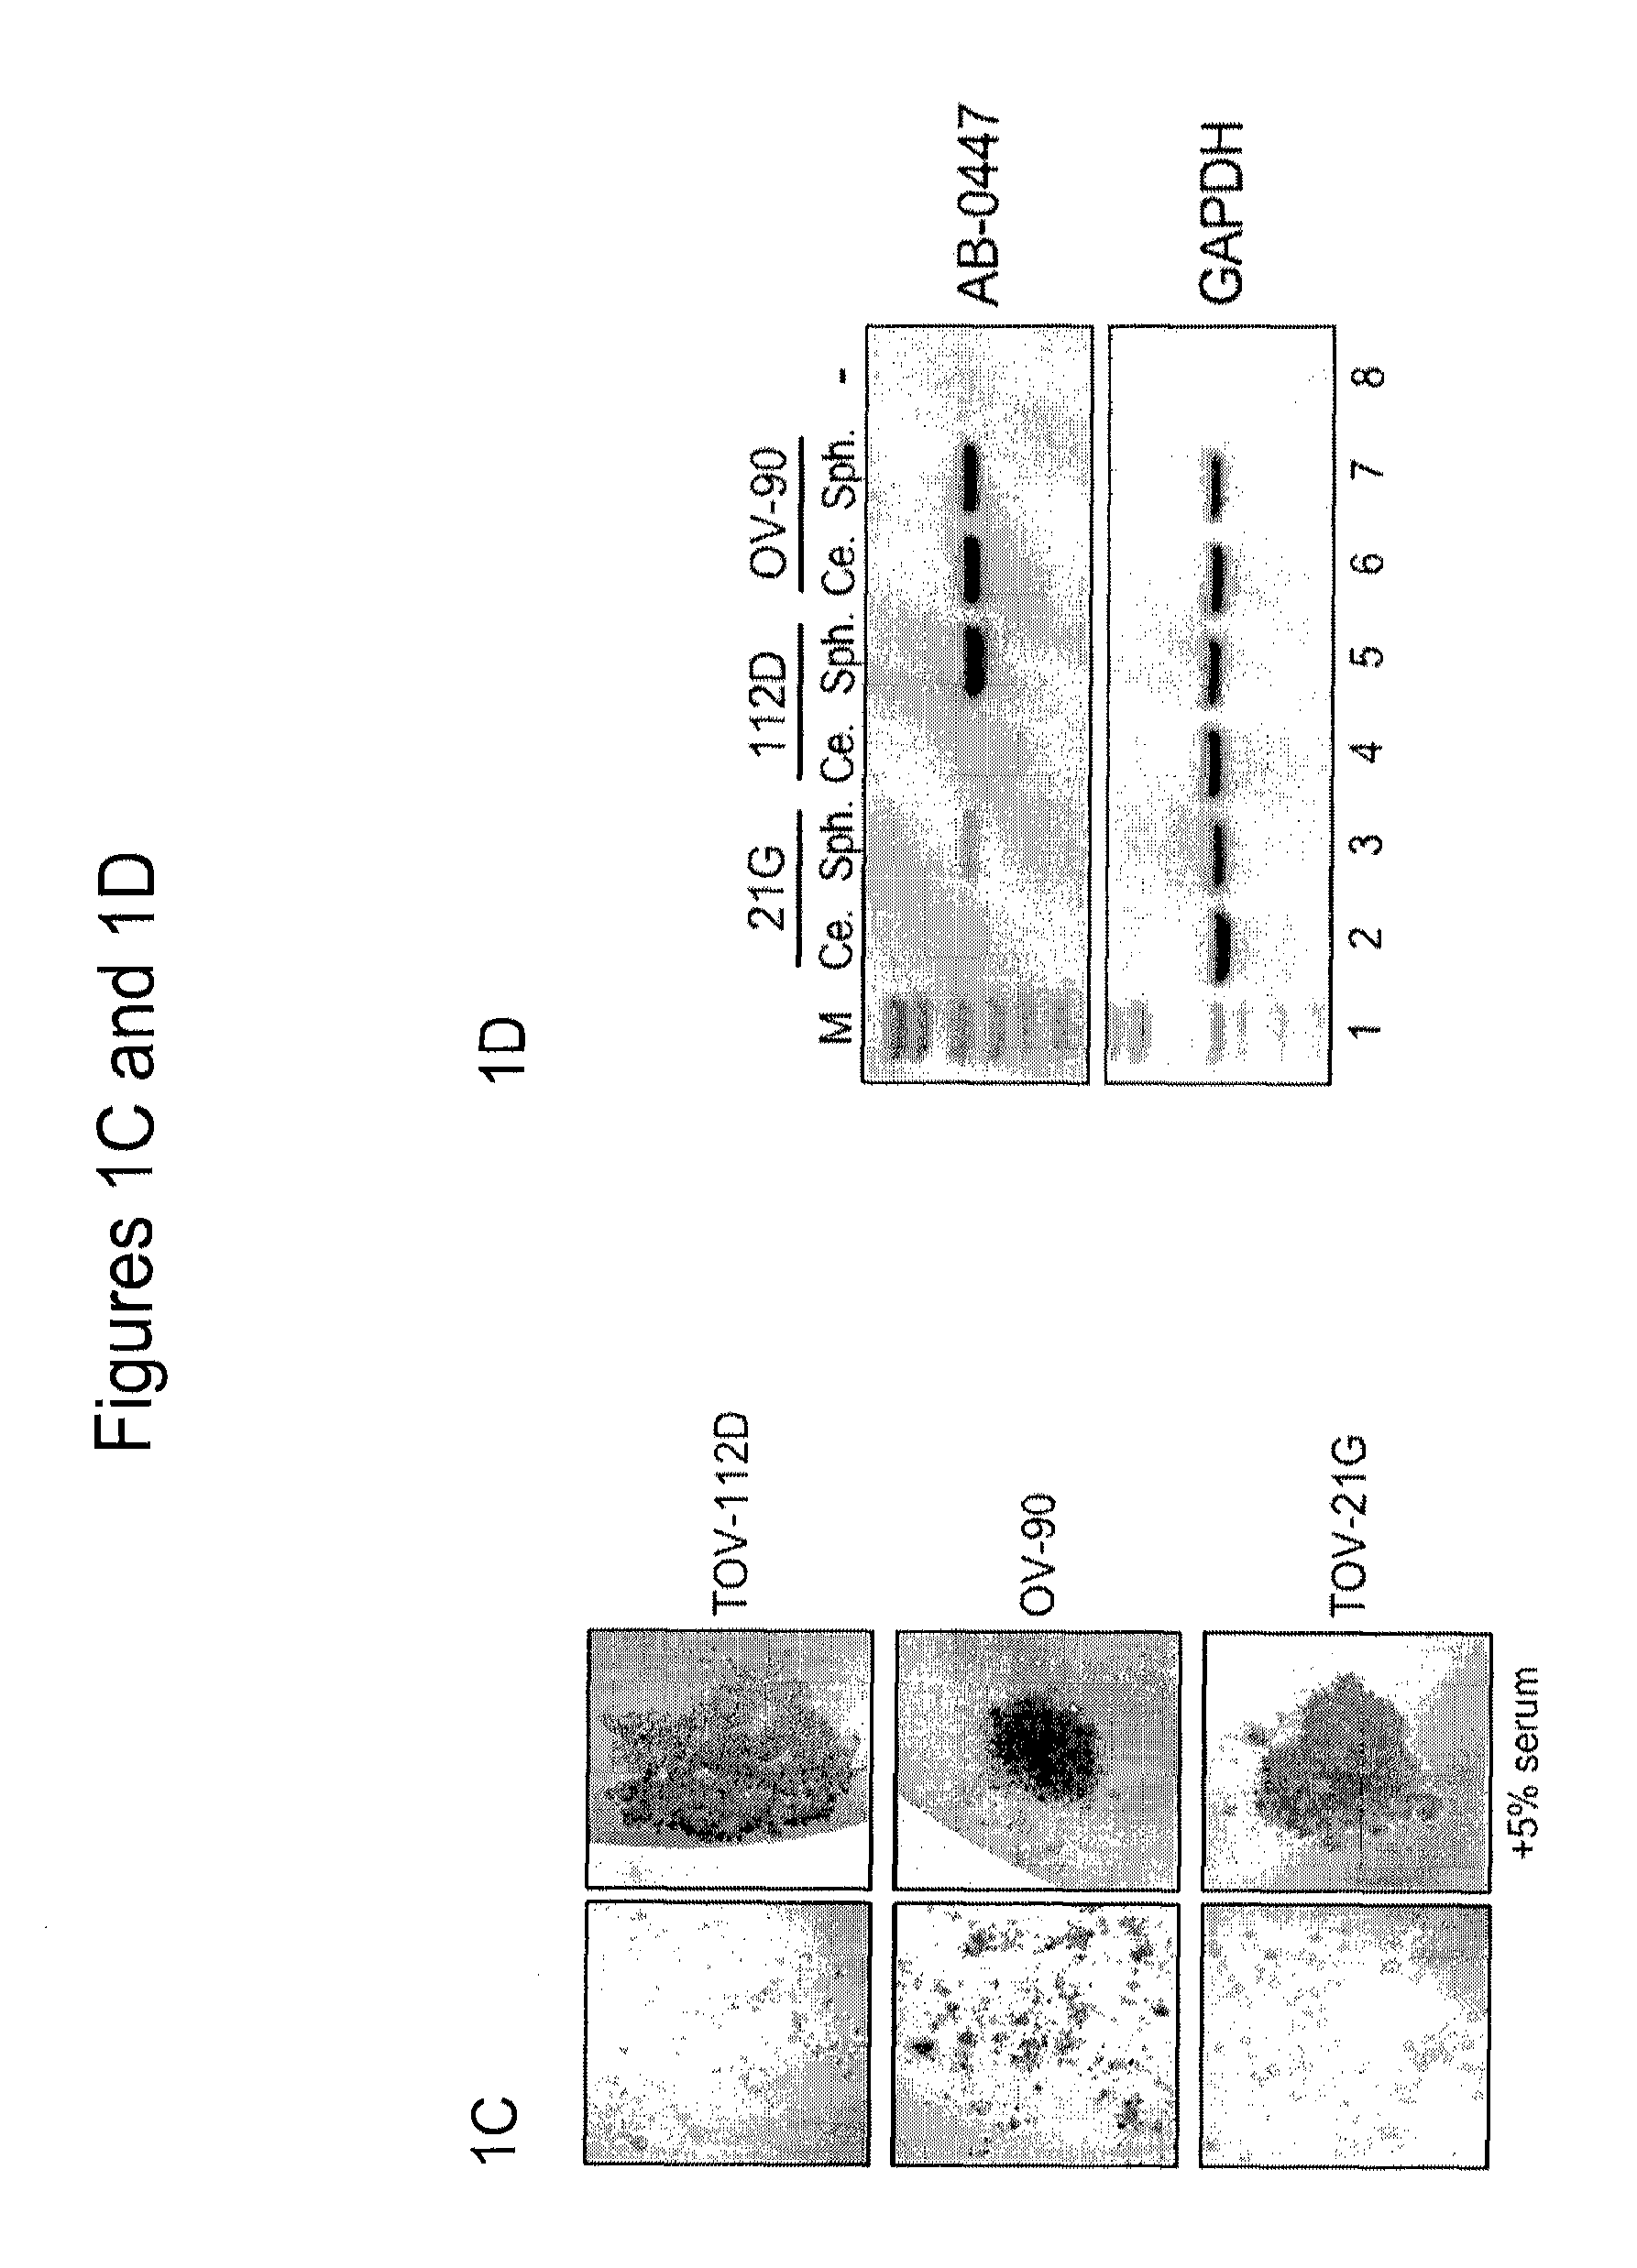 Antibodies that specifically block the biological activity of a tumor antigen